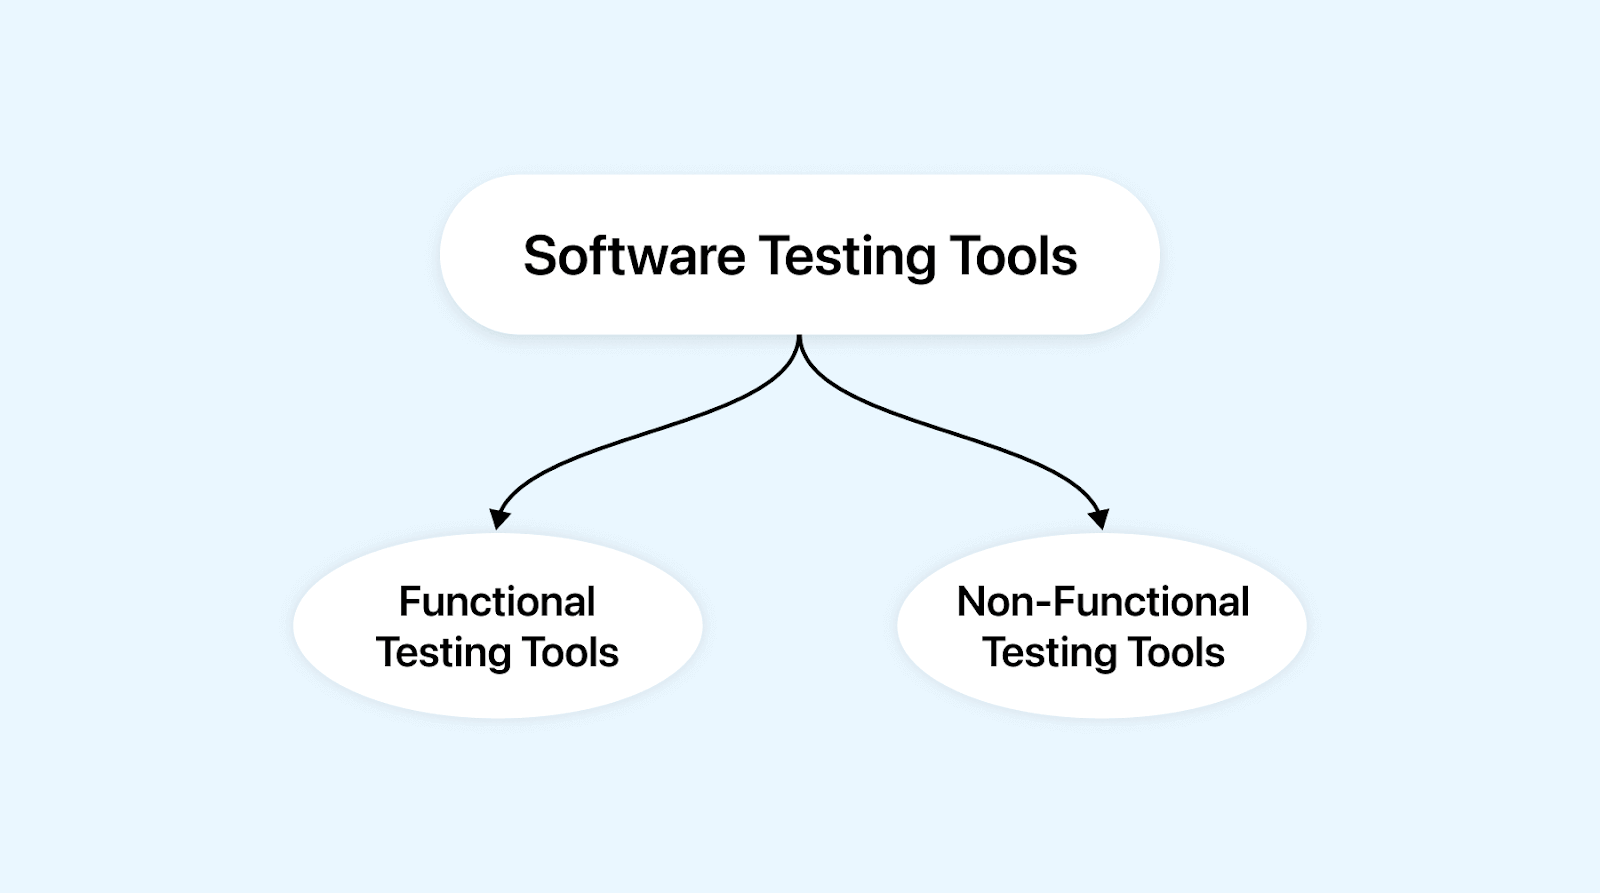 Types of Software Testing Tools